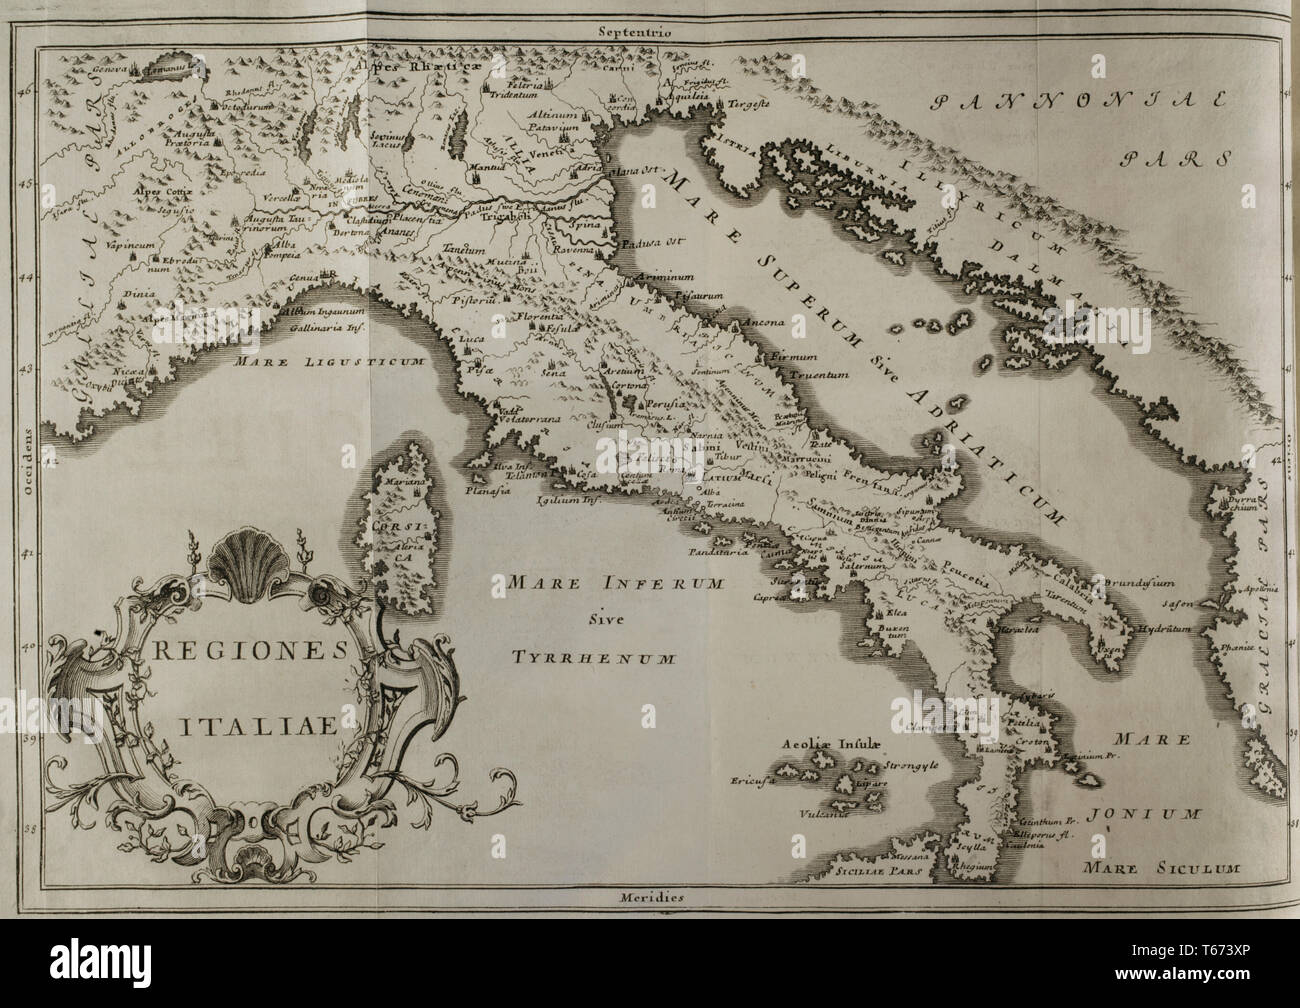 History by Polybius. Volume IV. French edition translated from Greek by Dom Vincent Thuillier. Comments of Military Science enriched with critical and historical notes by M. De Folard. Paris, chez Pierre Gandouin, Julien-Michel Gandouin, Pierre-Francois Giffart and Nicolas-Pierre Armand, 1728. Map of Italy. Stock Photo